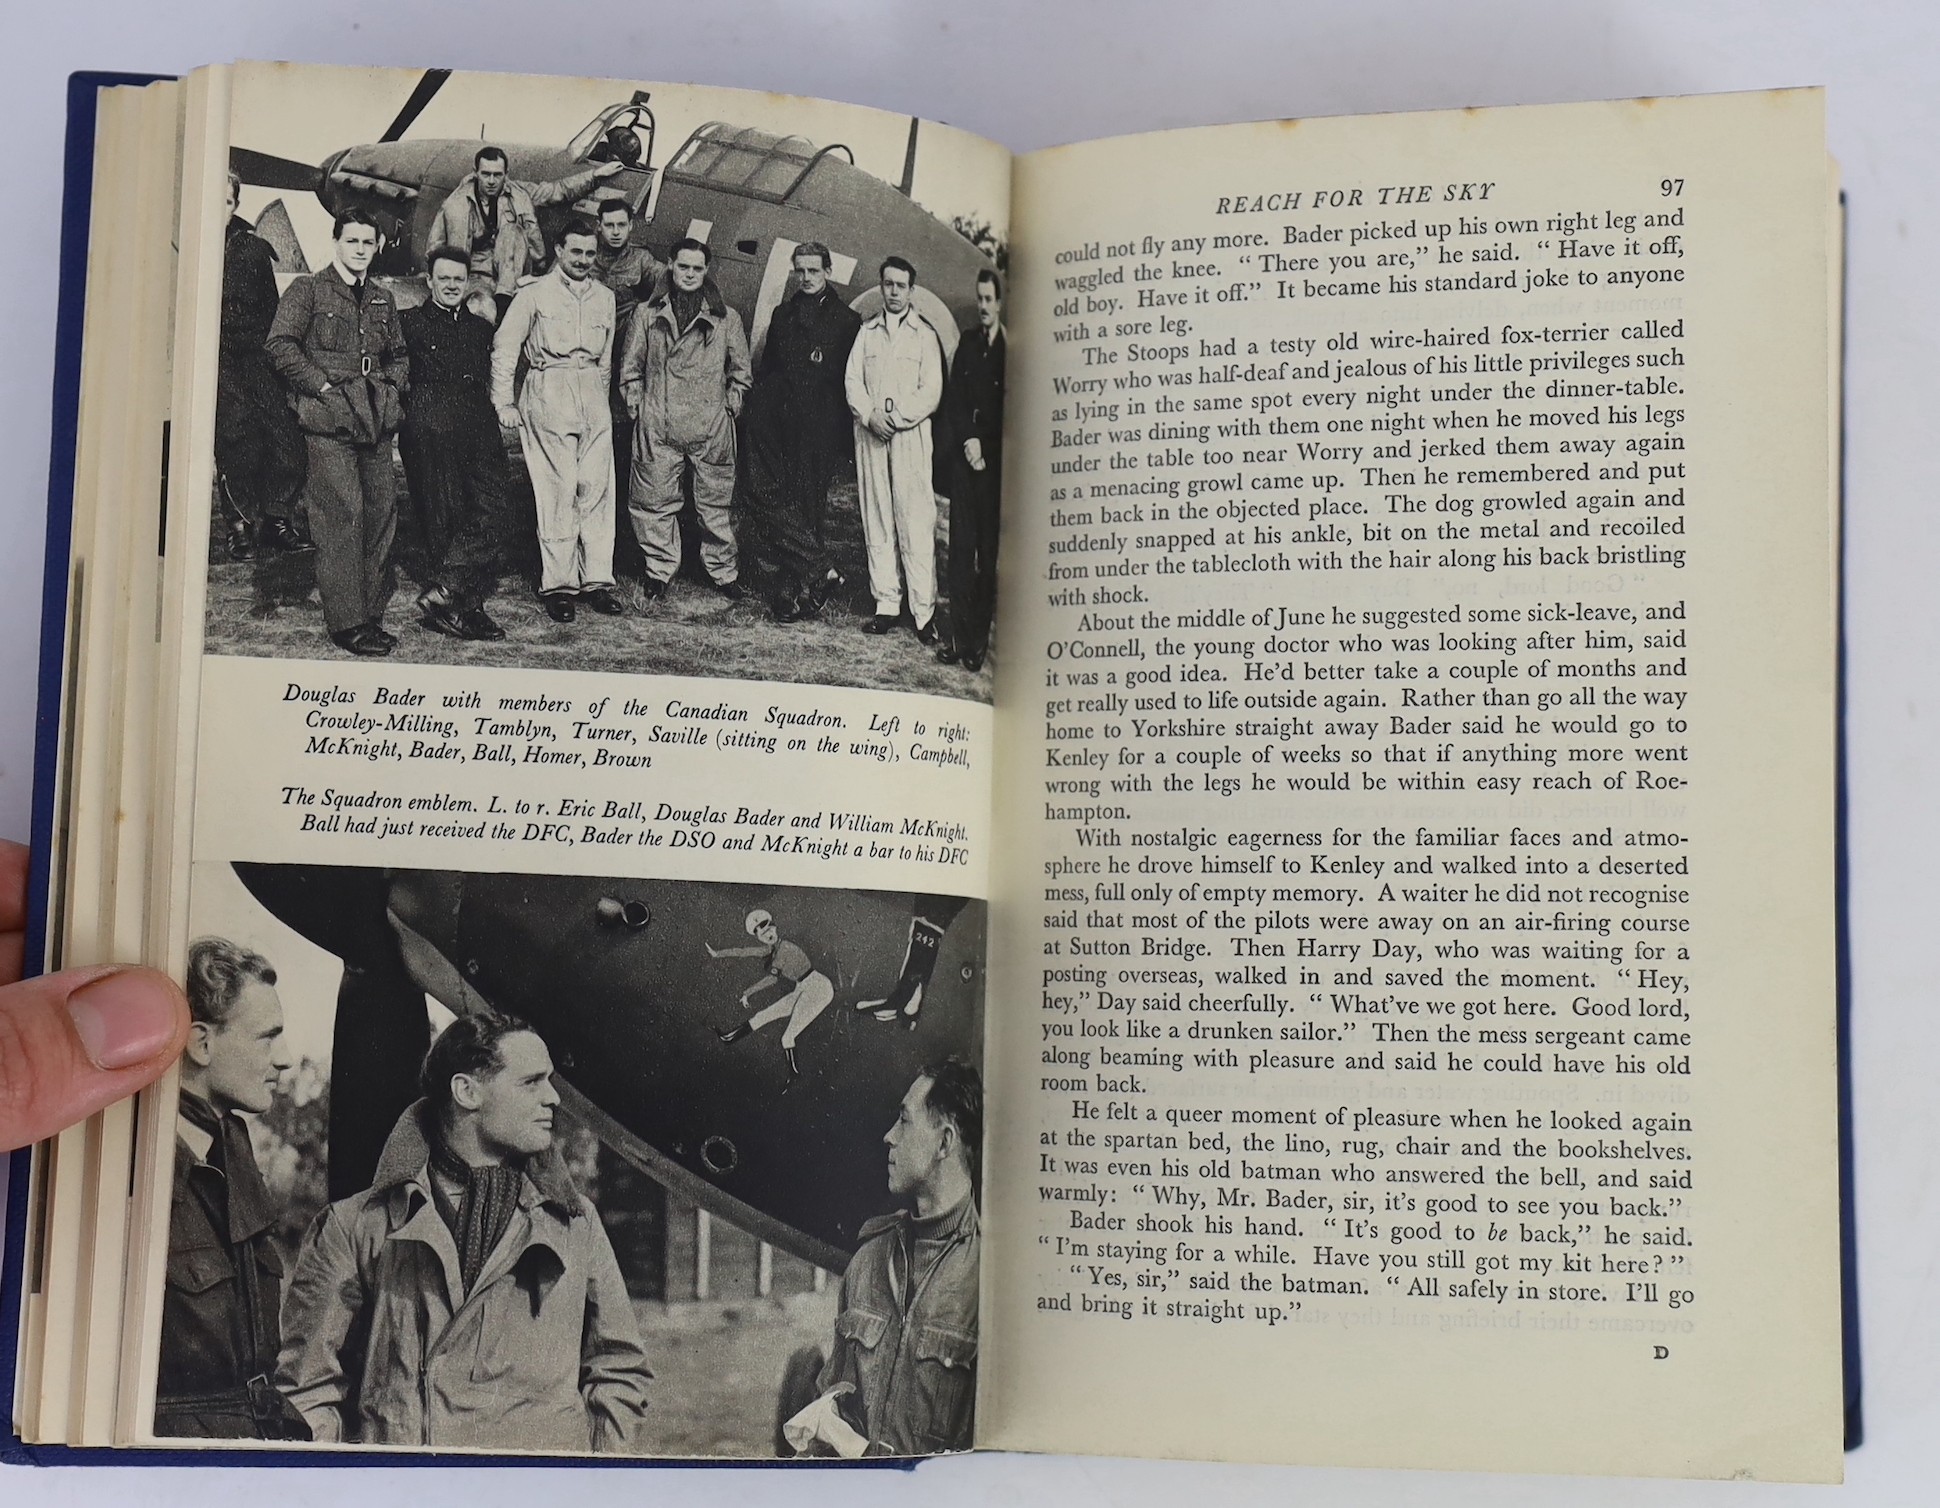 Brickhill, Paul - Reach For the Sky: Douglas Bader His Life Story, 8vo, cloth in unclipped d/j, signed by Douglas Bader, dated 19th March, 1954, Collins, London, 1954